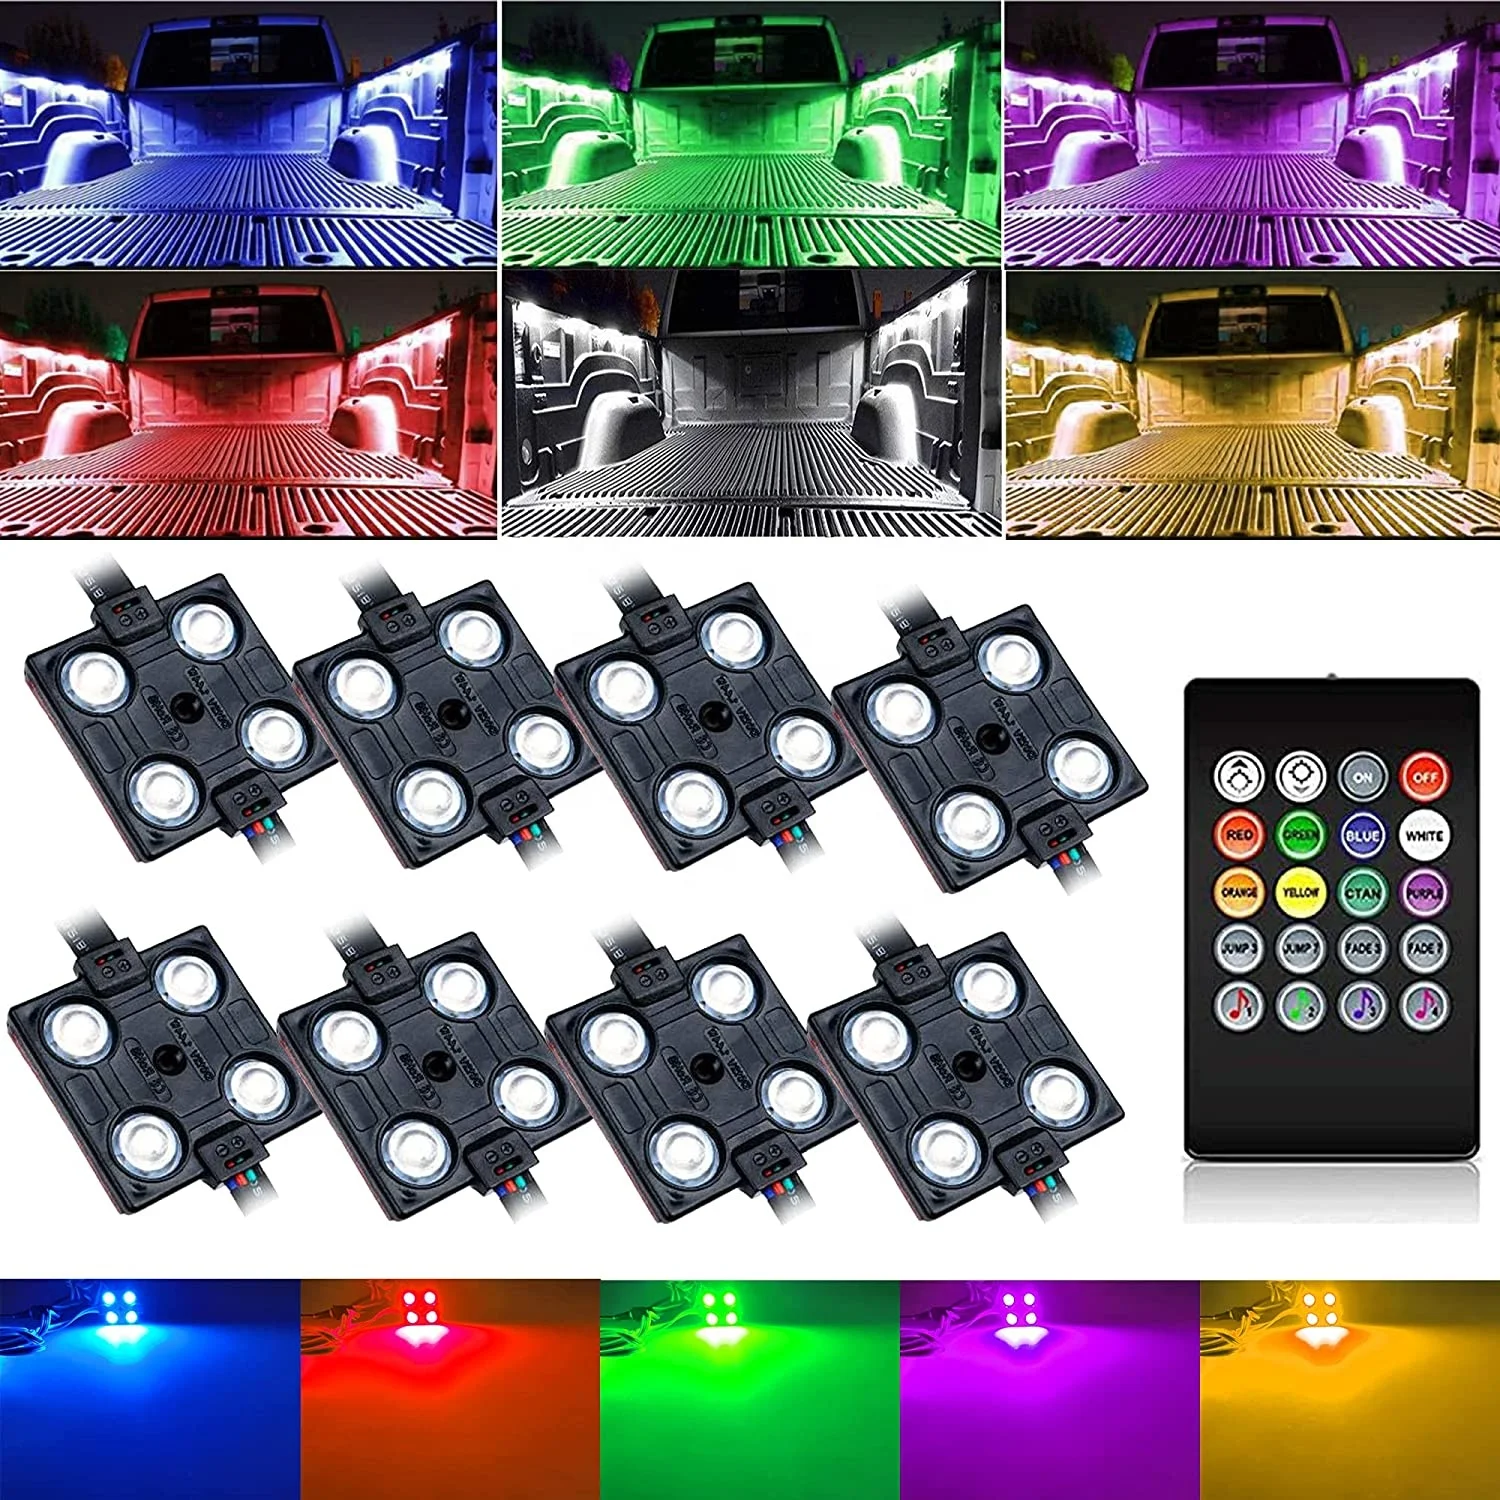 8pcs RGB LED Truck Bed Light Kit, 8 Colors Pickup Cargo Rock Lighting Kits w/Wireless Remote Control, Universal for Car Interior